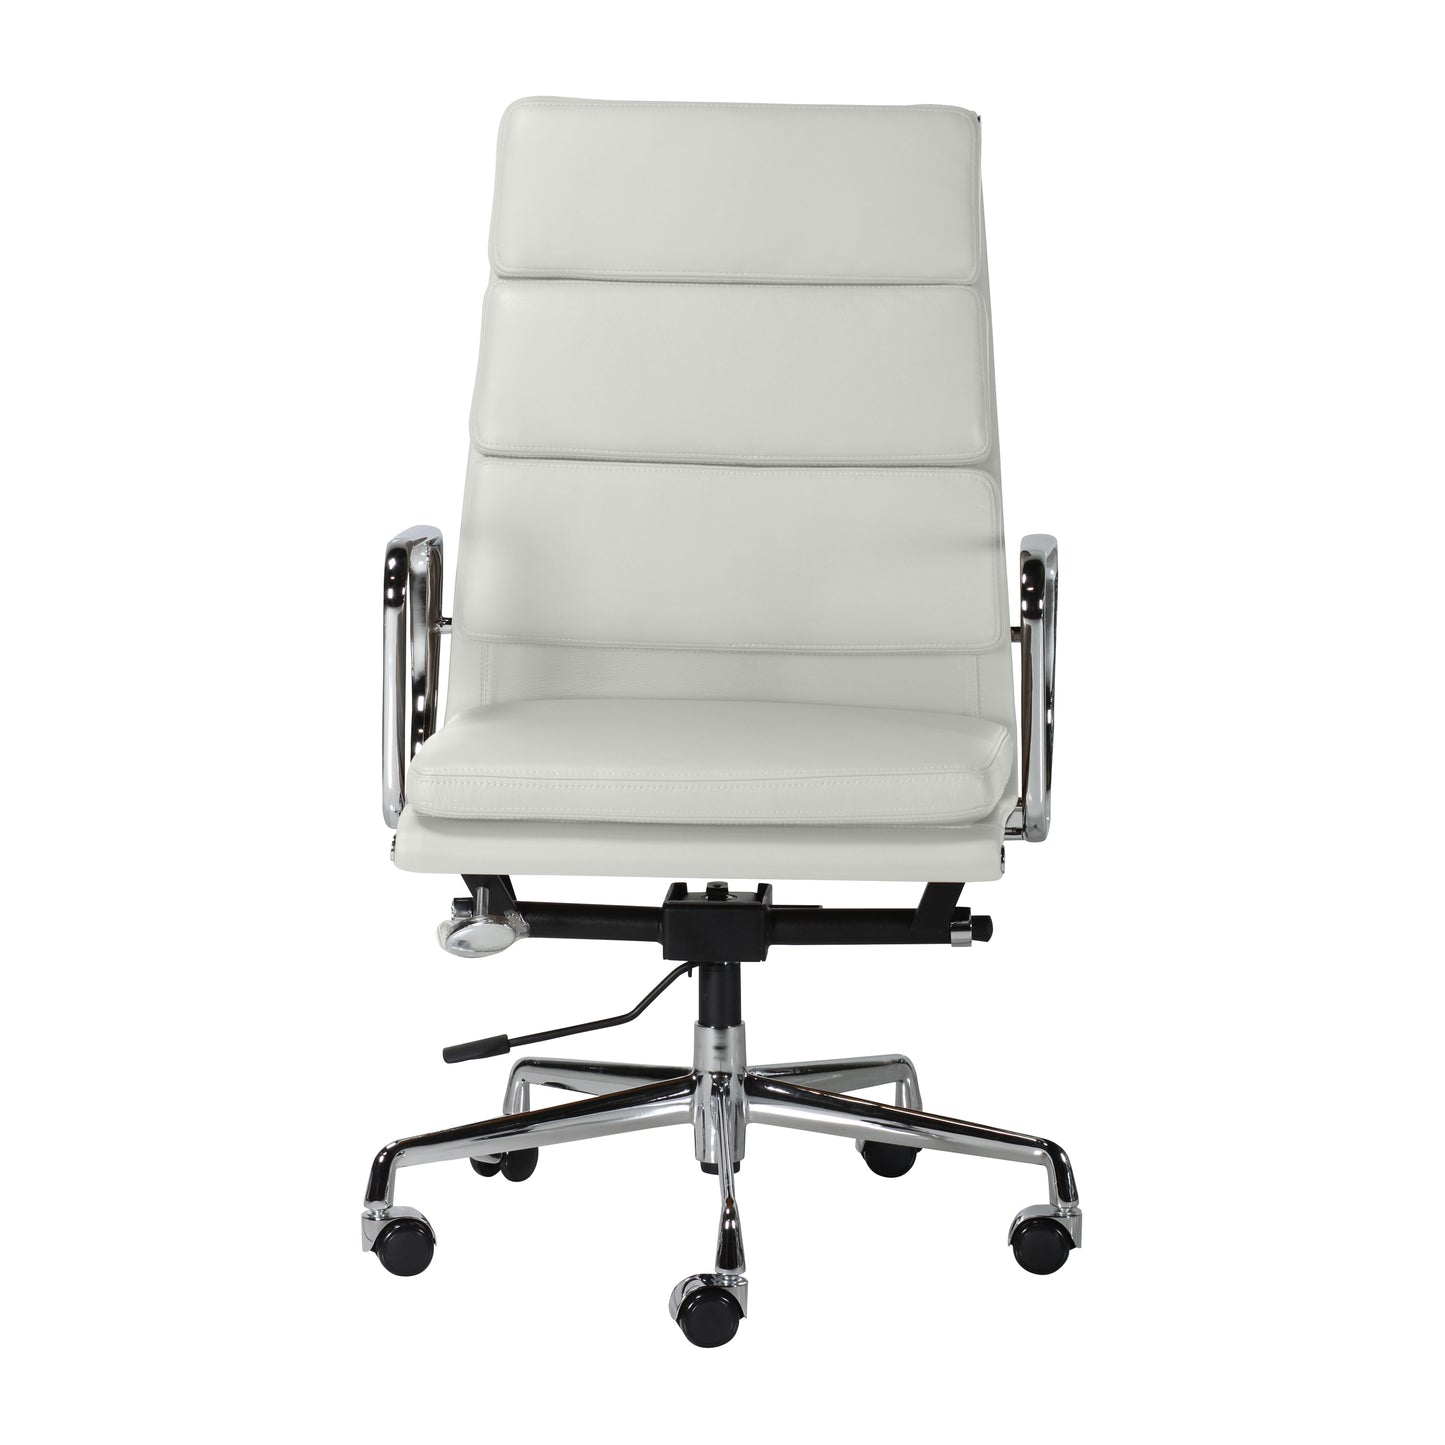 Soft pad chair aluminium style | Milk Leather | Front